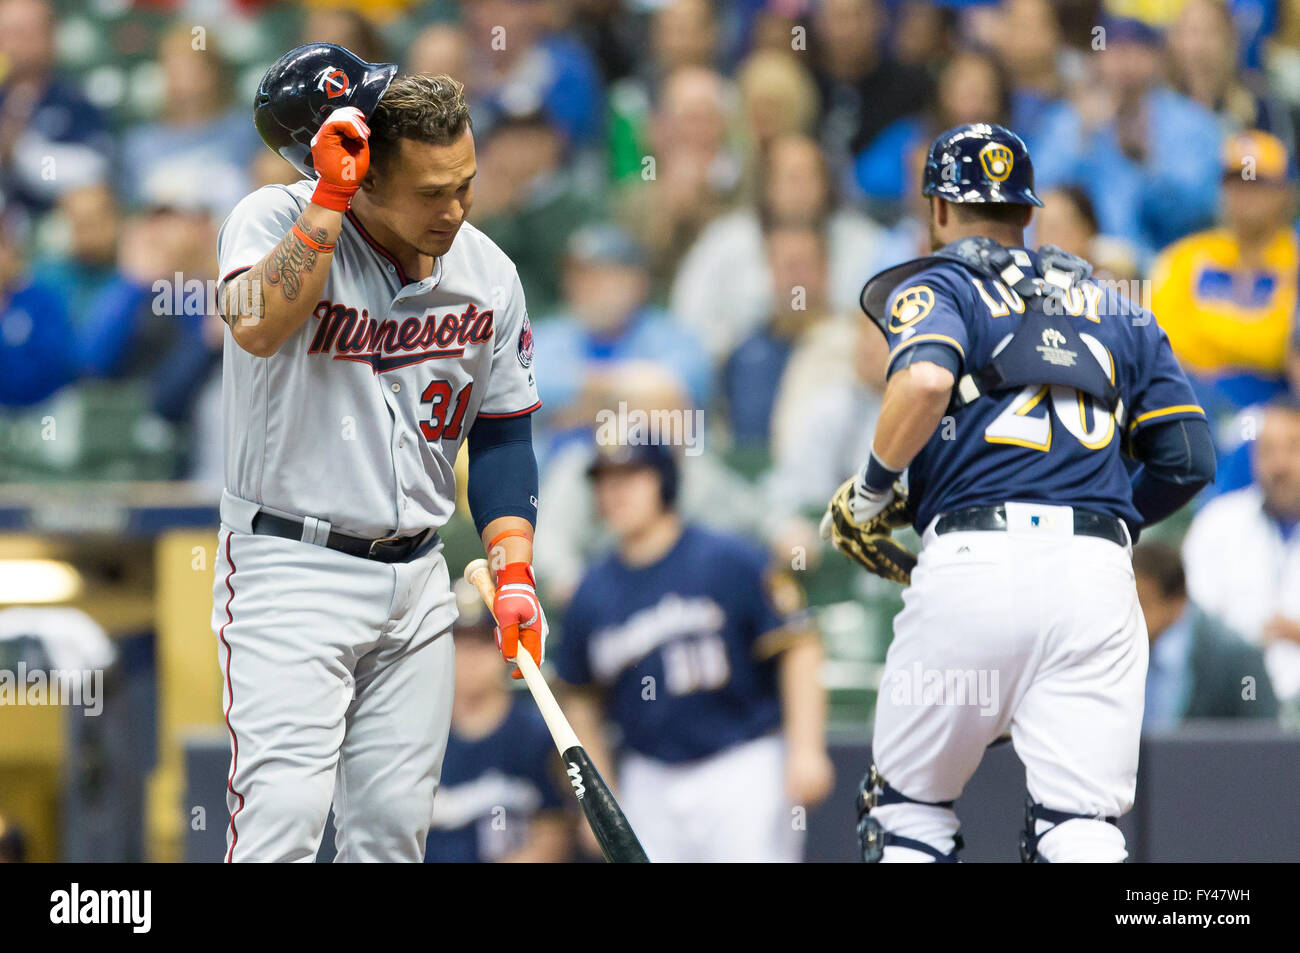 Milwaukee, WI, USA. 20th Apr, 2016. Minnesota Twins right fielder Oswaldo Arcia #31 strikes out during the Major League Baseball game between the Milwaukee Brewers and the Minnesota Twins at Miller Park in Milwaukee, WI. John Fisher/CSM/Alamy Live News Stock Photo